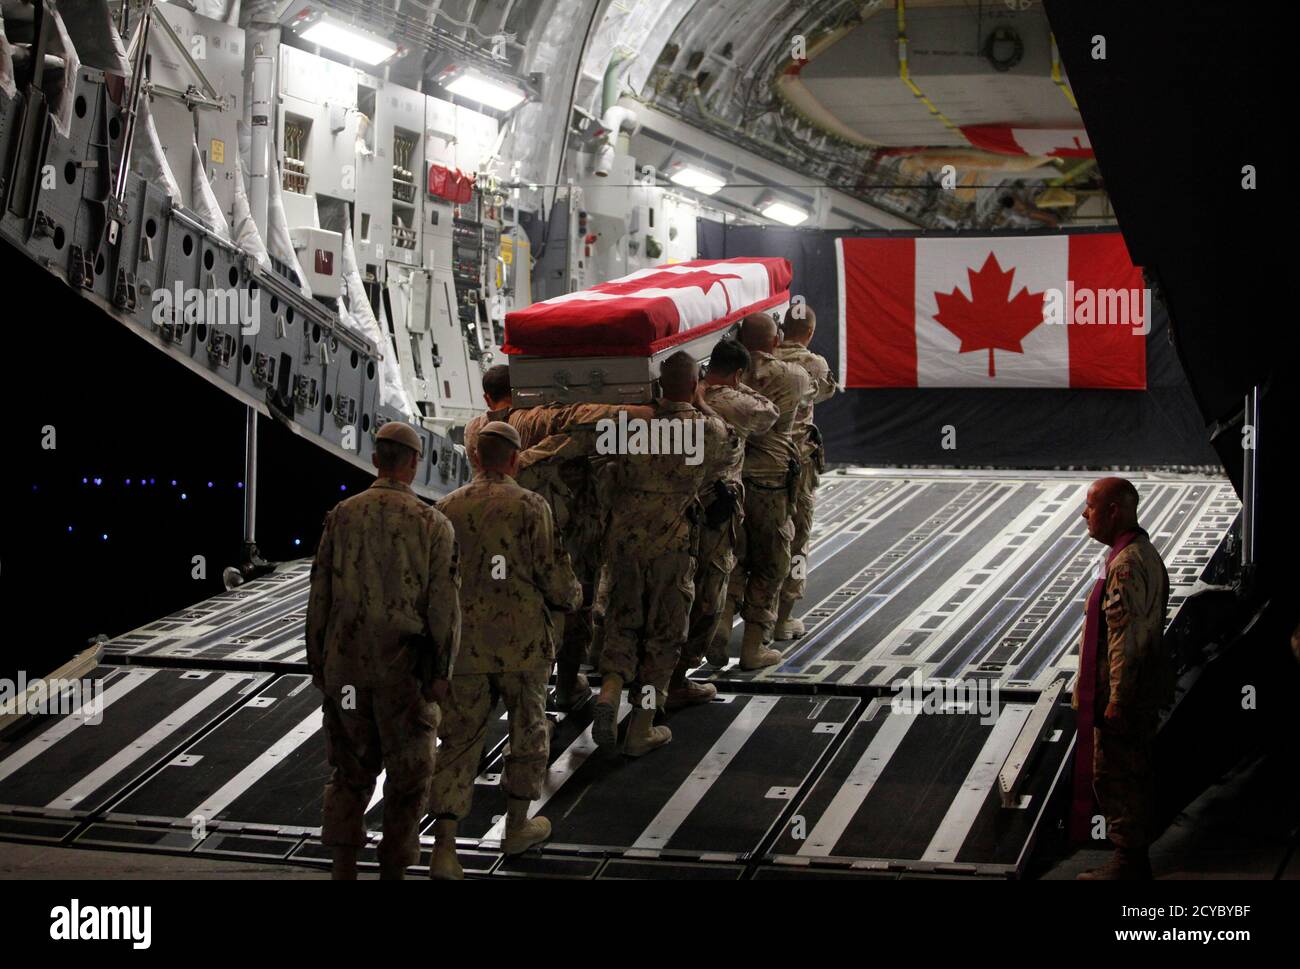 Canadian soldiers carry the coffin of Master Corporal Francis Roy during a ramp ceremony at Kandahar Air Field, June 28, 2011. Roy, 32, was found dead in a forward fire base in Kandahar city on June 25 and the circumstances of his death are still under investigation, an army spokesman said.  REUTERS/Baz Ratner   (AFGHANISTAN - Tags: CONFLICT MILITARY) Stock Photo